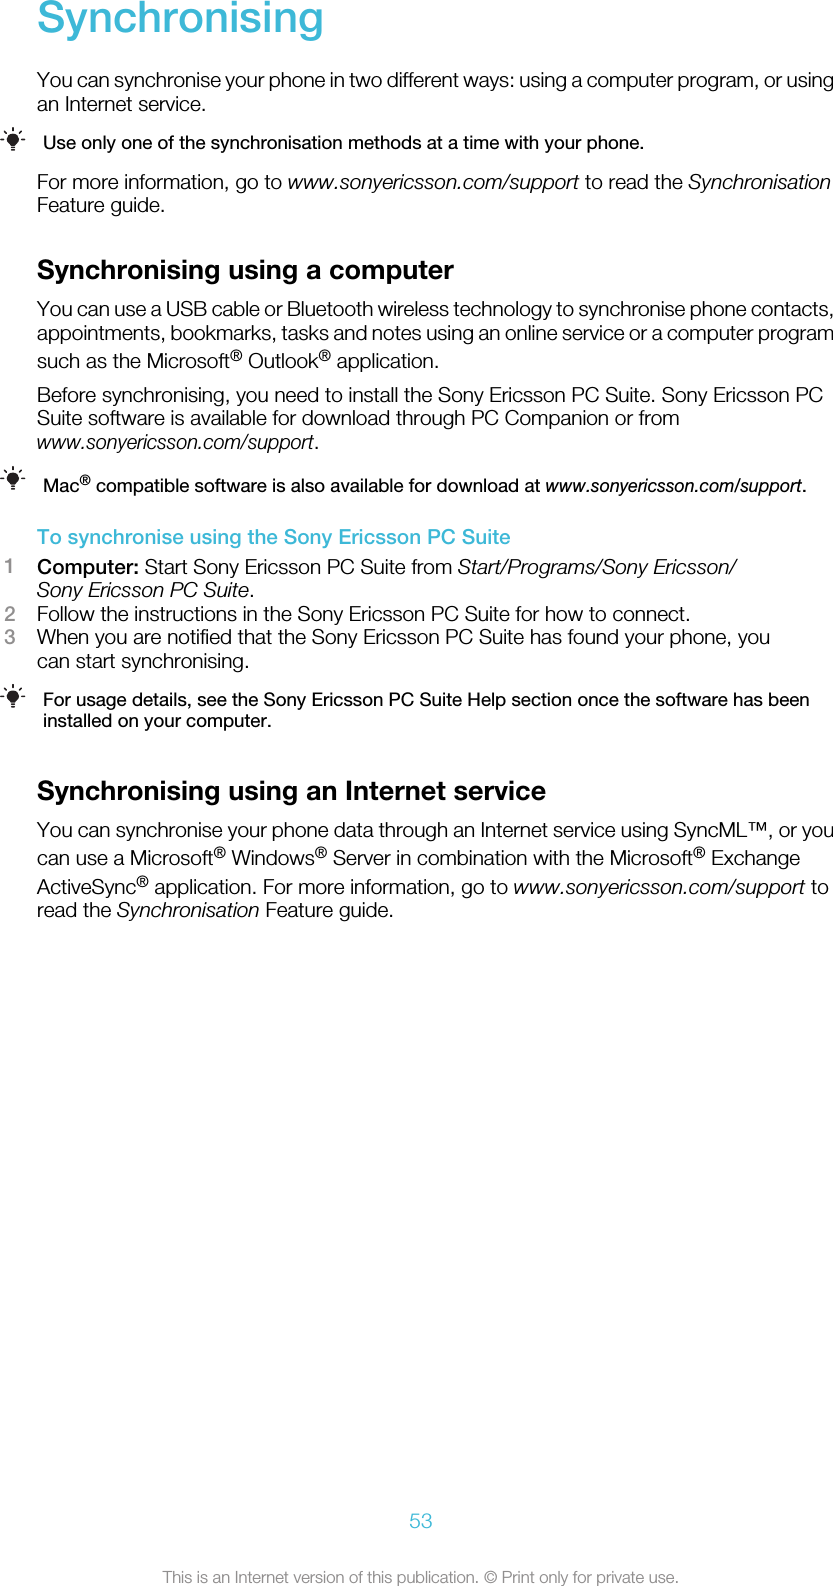 SynchronisingYou can synchronise your phone in two different ways: using a computer program, or usingan Internet service.Use only one of the synchronisation methods at a time with your phone.For more information, go to www.sonyericsson.com/support to read the SynchronisationFeature guide.Synchronising using a computerYou can use a USB cable or Bluetooth wireless technology to synchronise phone contacts,appointments, bookmarks, tasks and notes using an online service or a computer programsuch as the Microsoft® Outlook® application.Before synchronising, you need to install the Sony Ericsson PC Suite. Sony Ericsson PCSuite software is available for download through PC Companion or fromwww.sonyericsson.com/support.Mac® compatible software is also available for download at www.sonyericsson.com/support.To synchronise using the Sony Ericsson PC Suite1Computer: Start Sony Ericsson PC Suite from Start/Programs/Sony Ericsson/Sony Ericsson PC Suite.2Follow the instructions in the Sony Ericsson PC Suite for how to connect.3When you are notified that the Sony Ericsson PC Suite has found your phone, youcan start synchronising.For usage details, see the Sony Ericsson PC Suite Help section once the software has beeninstalled on your computer.Synchronising using an Internet serviceYou can synchronise your phone data through an Internet service using SyncML™, or youcan use a Microsoft® Windows® Server in combination with the Microsoft® ExchangeActiveSync® application. For more information, go to www.sonyericsson.com/support toread the Synchronisation Feature guide.53This is an Internet version of this publication. © Print only for private use.